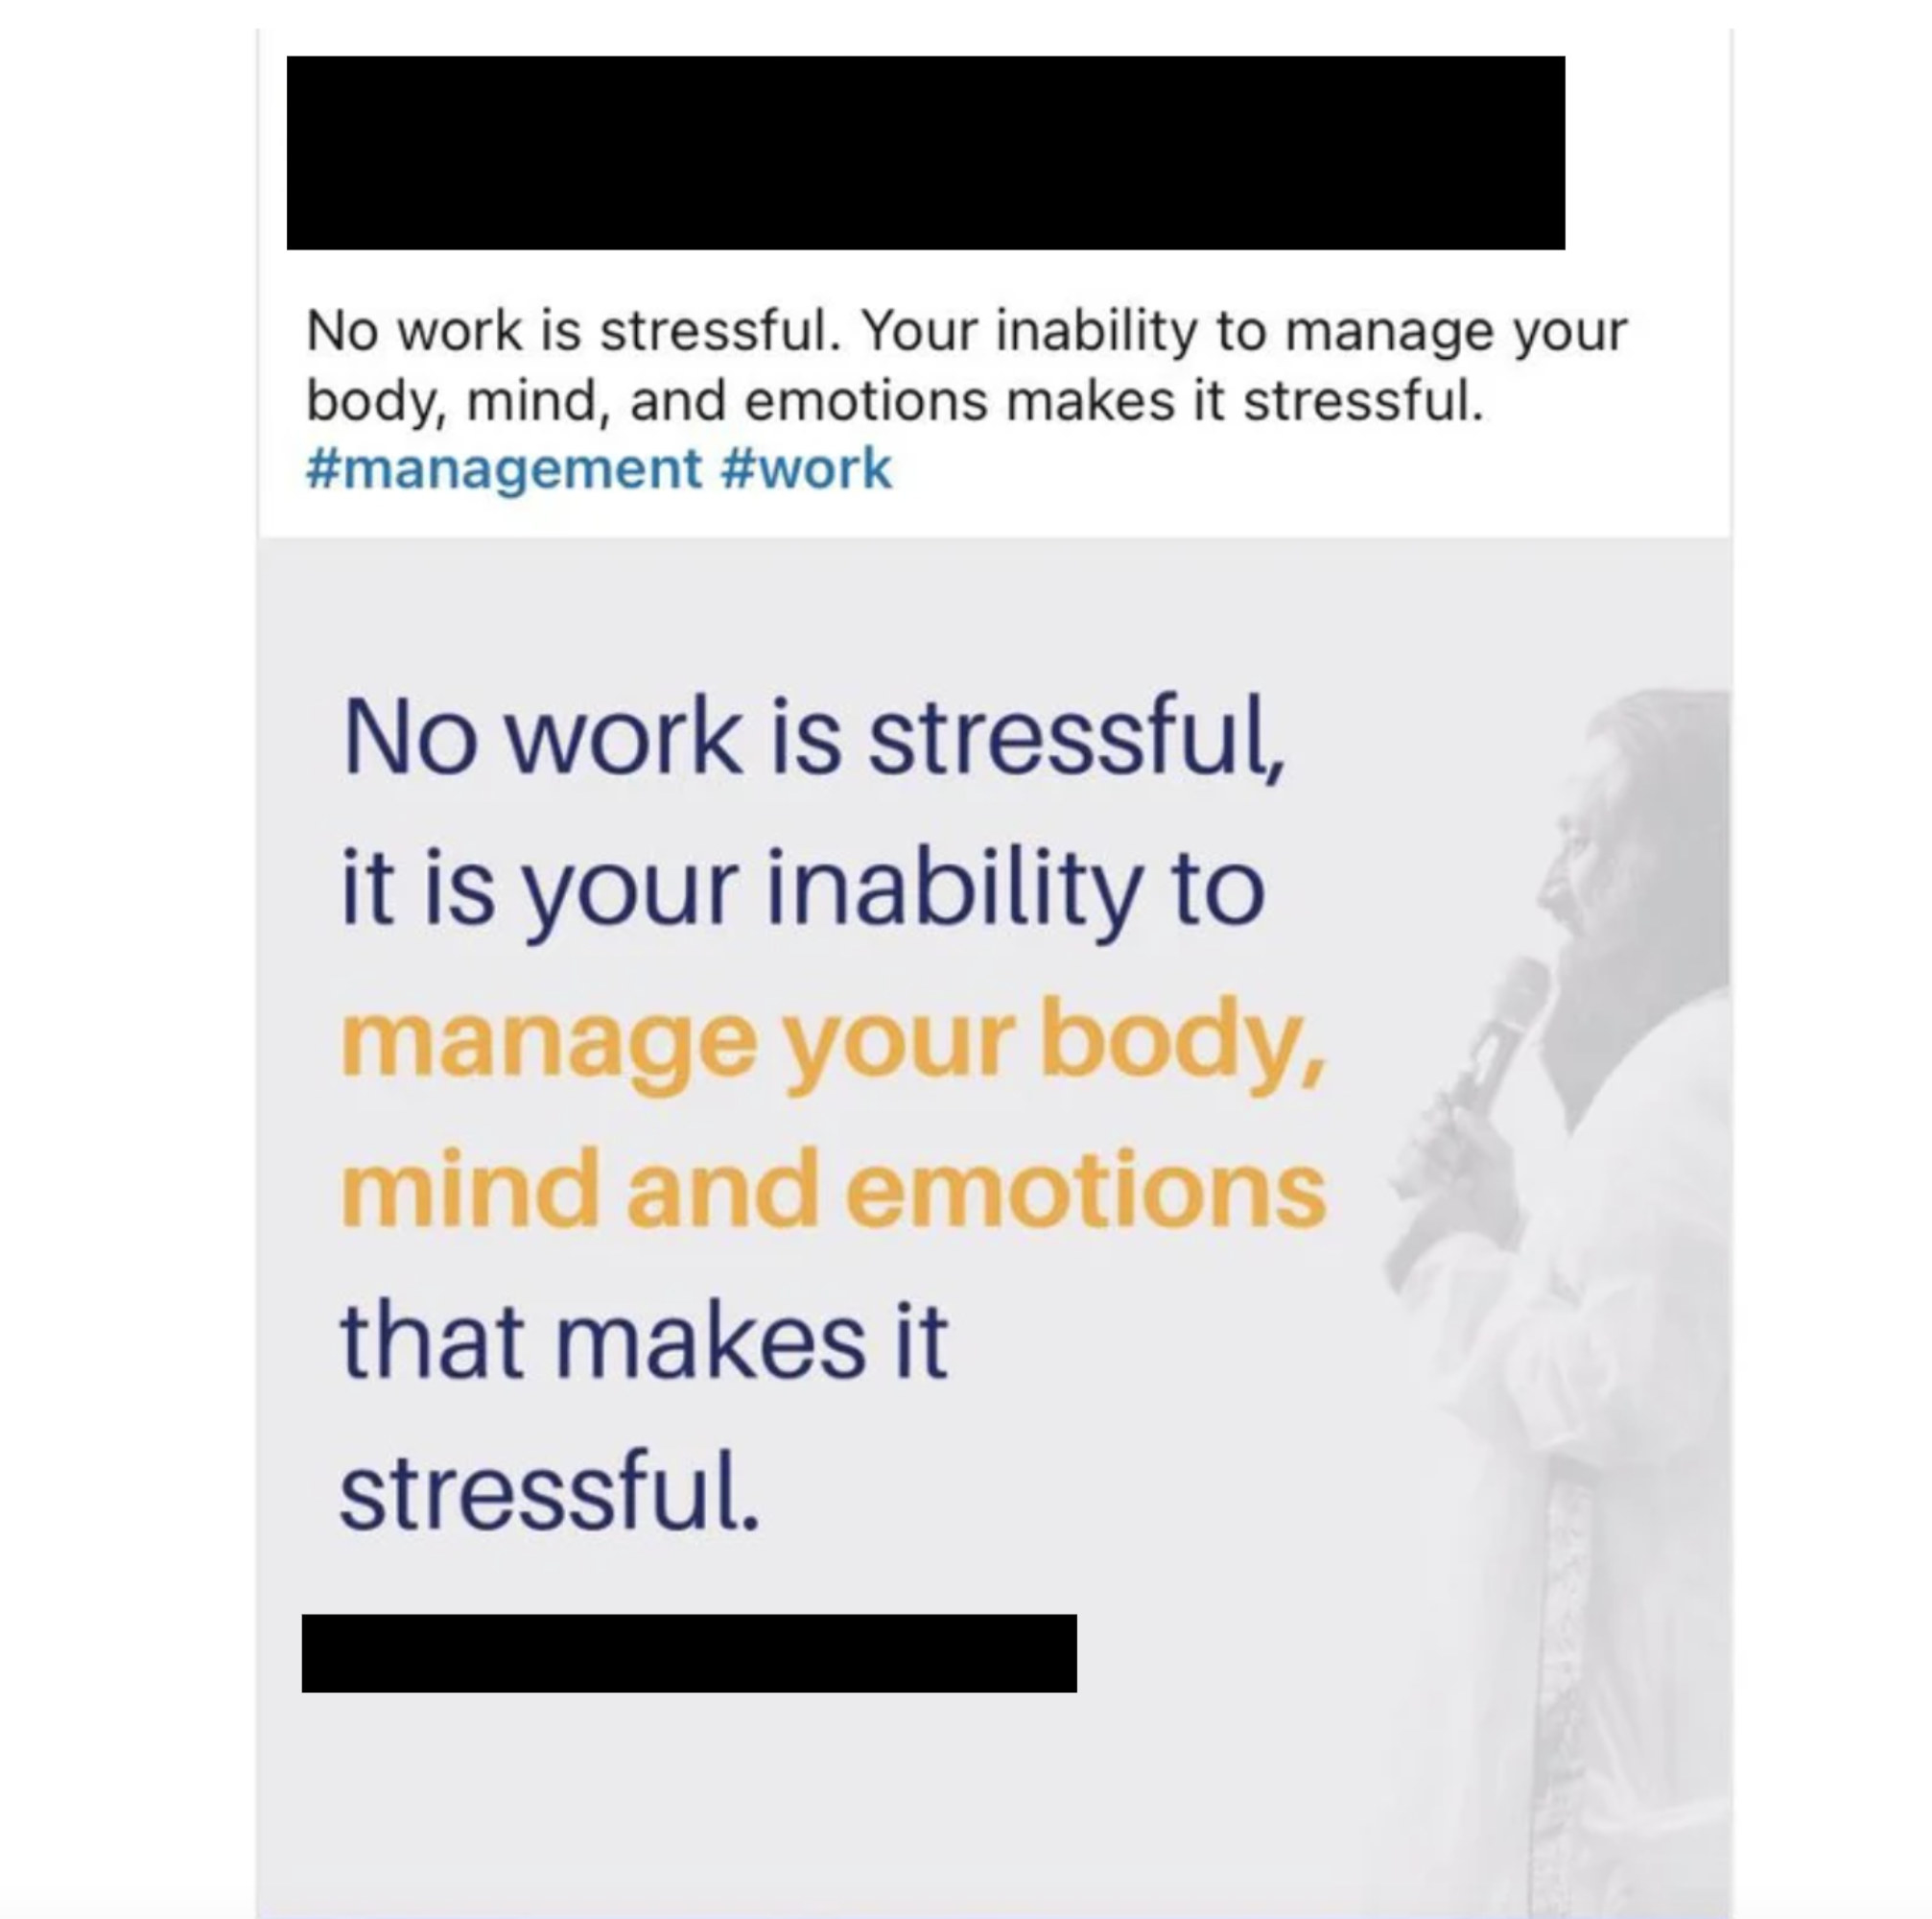 text: no work is stressful, it is your inability to manage your body, mind, and emotions